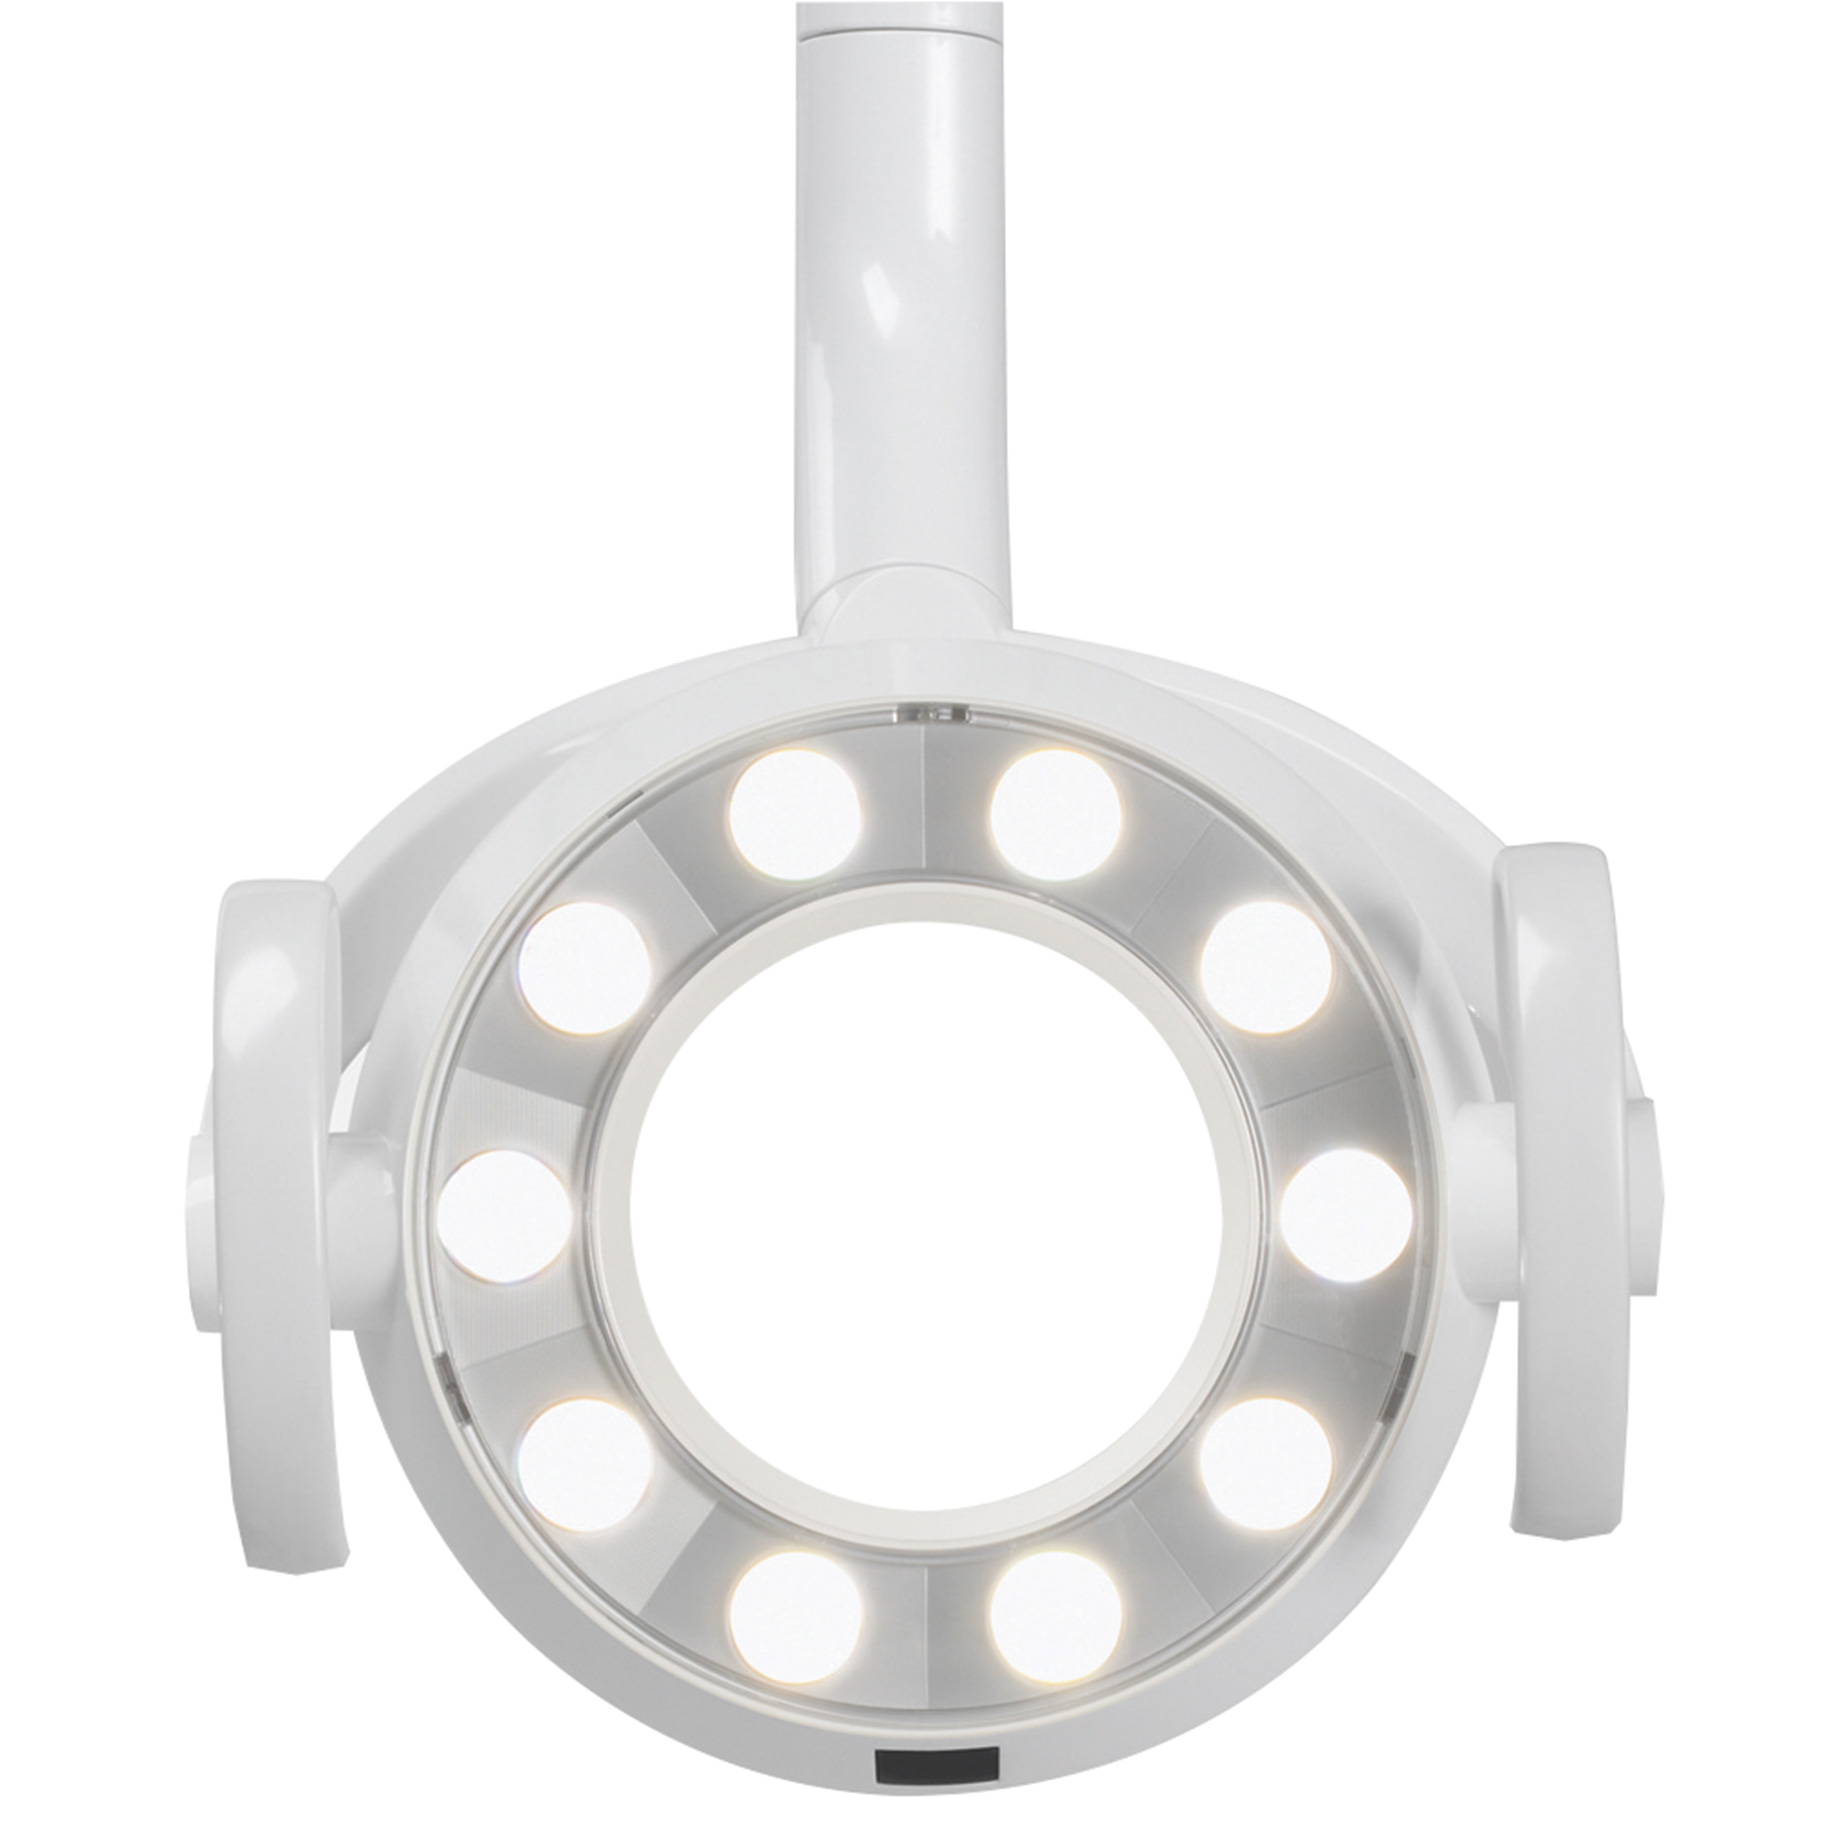 ﻿900 Series ﻿902 - Ceiling mounted Light + Pole 